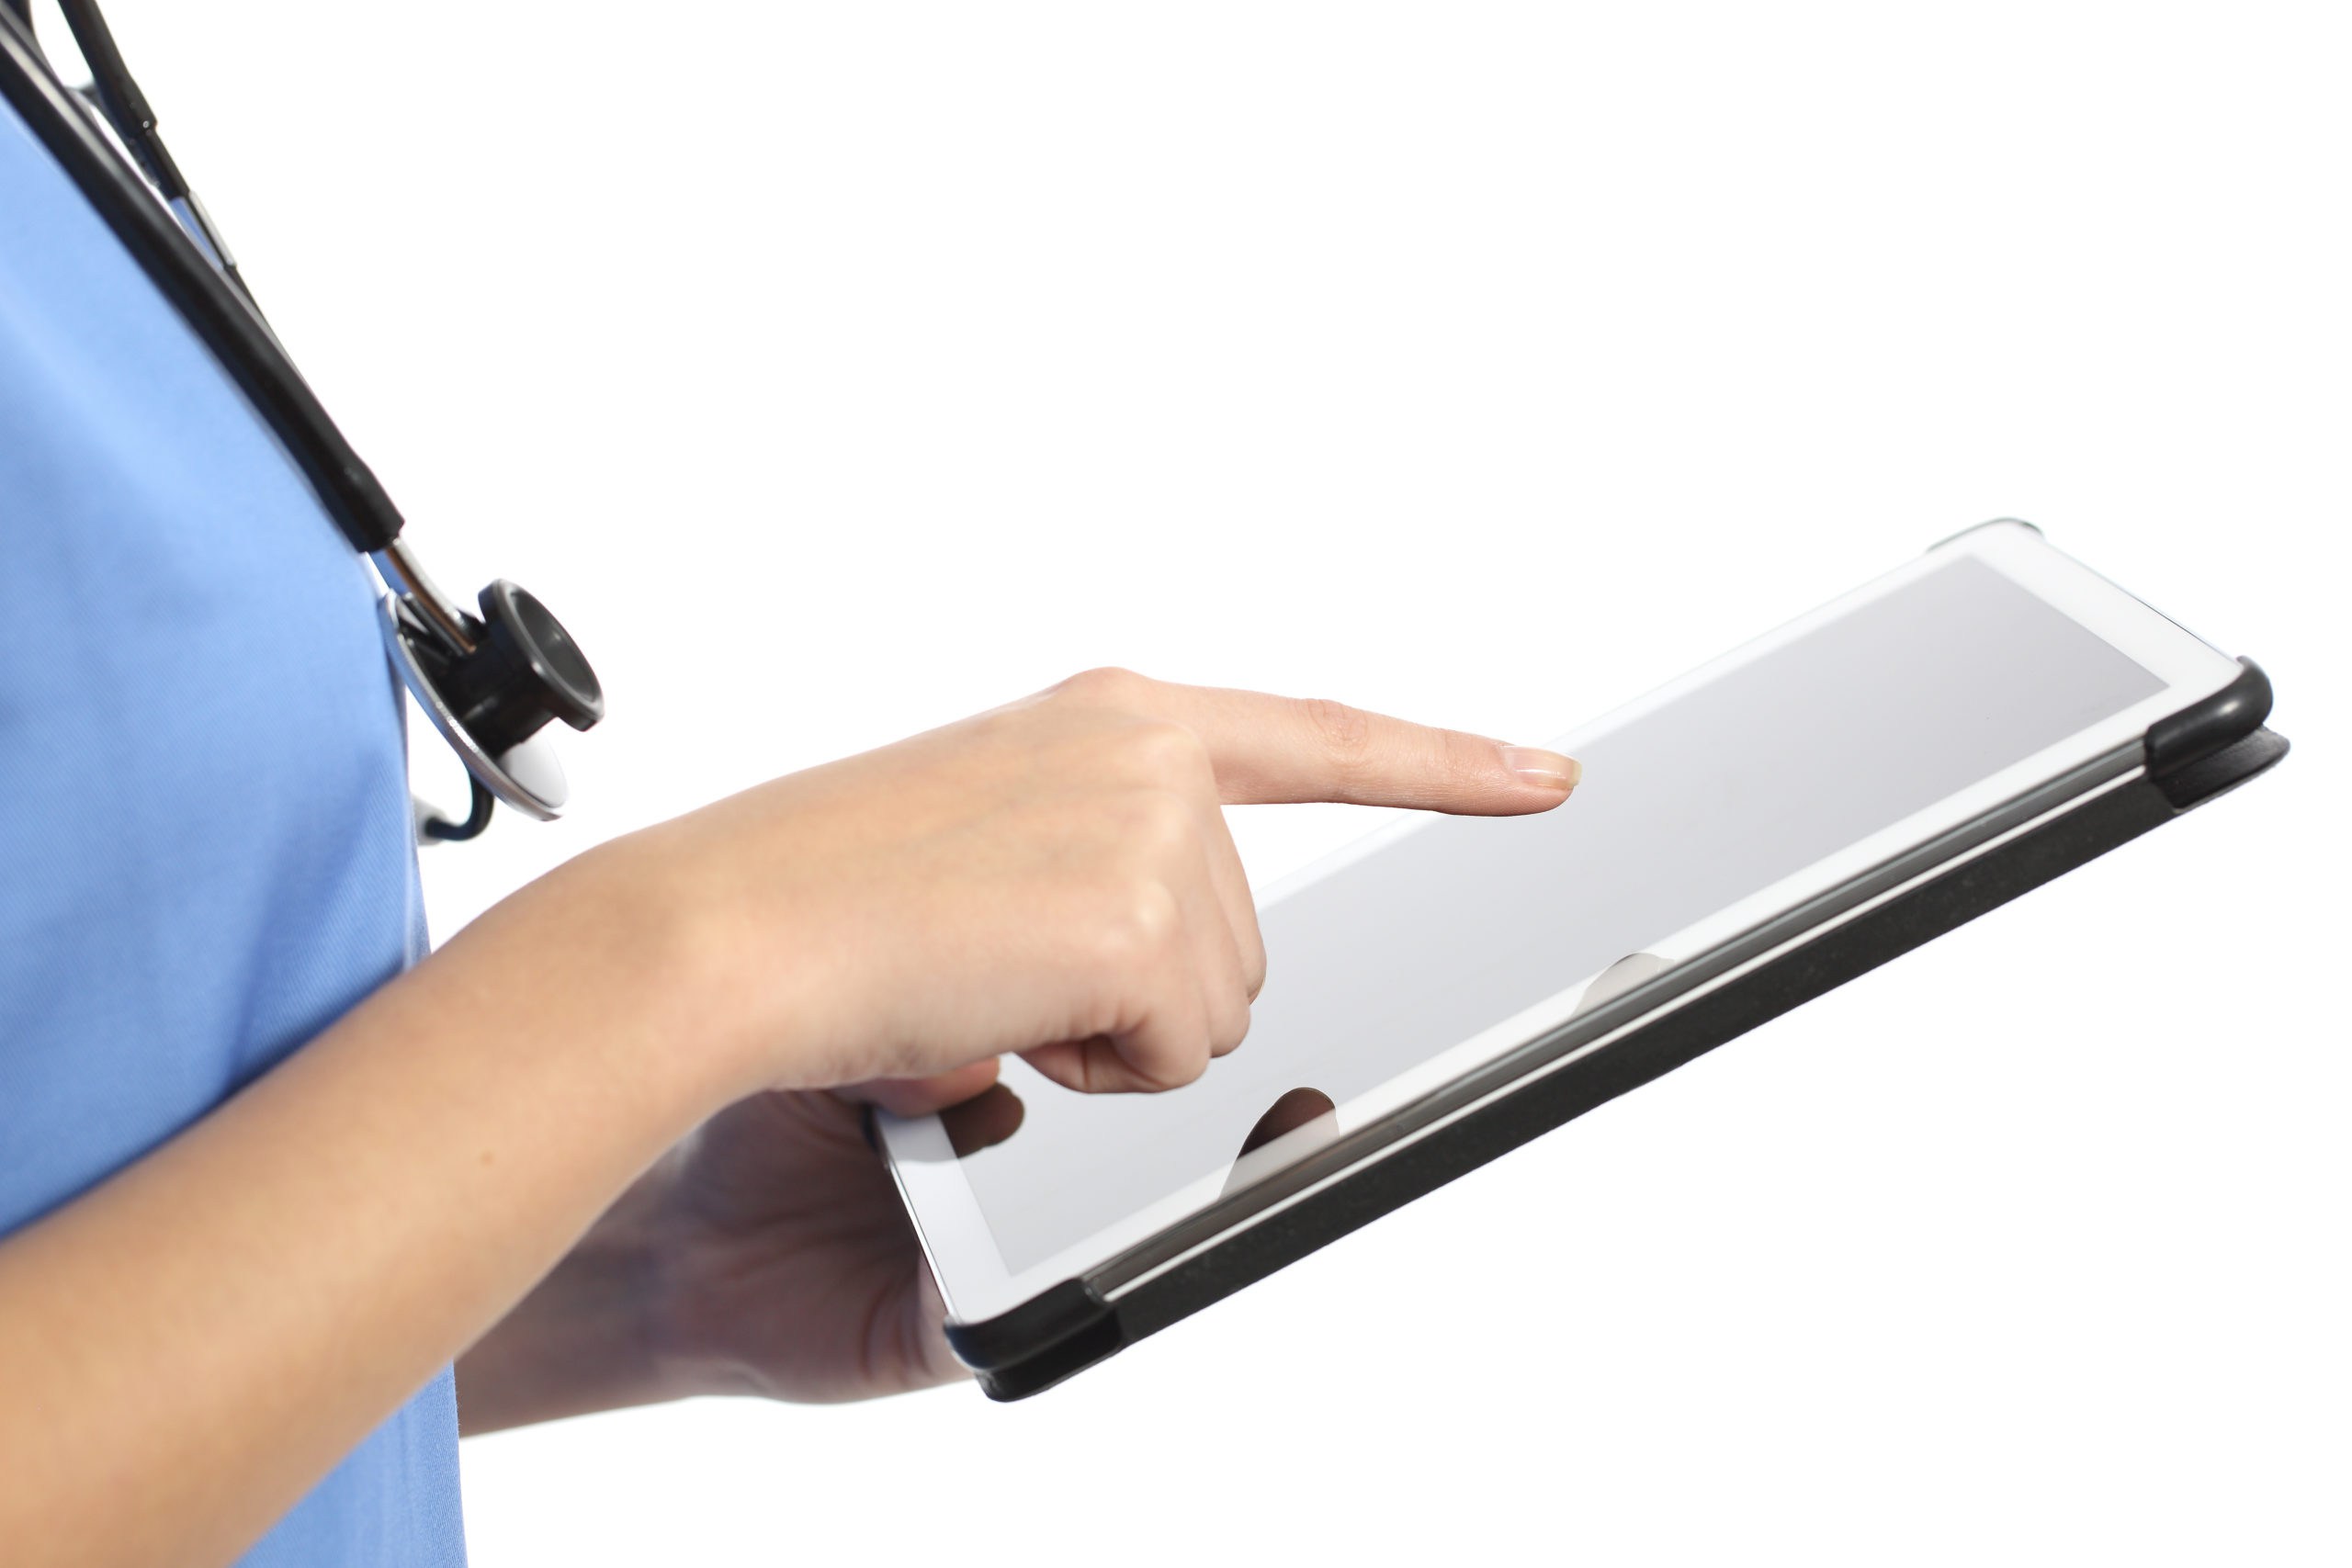 My experience transitioning from frontline nursing to a digital role